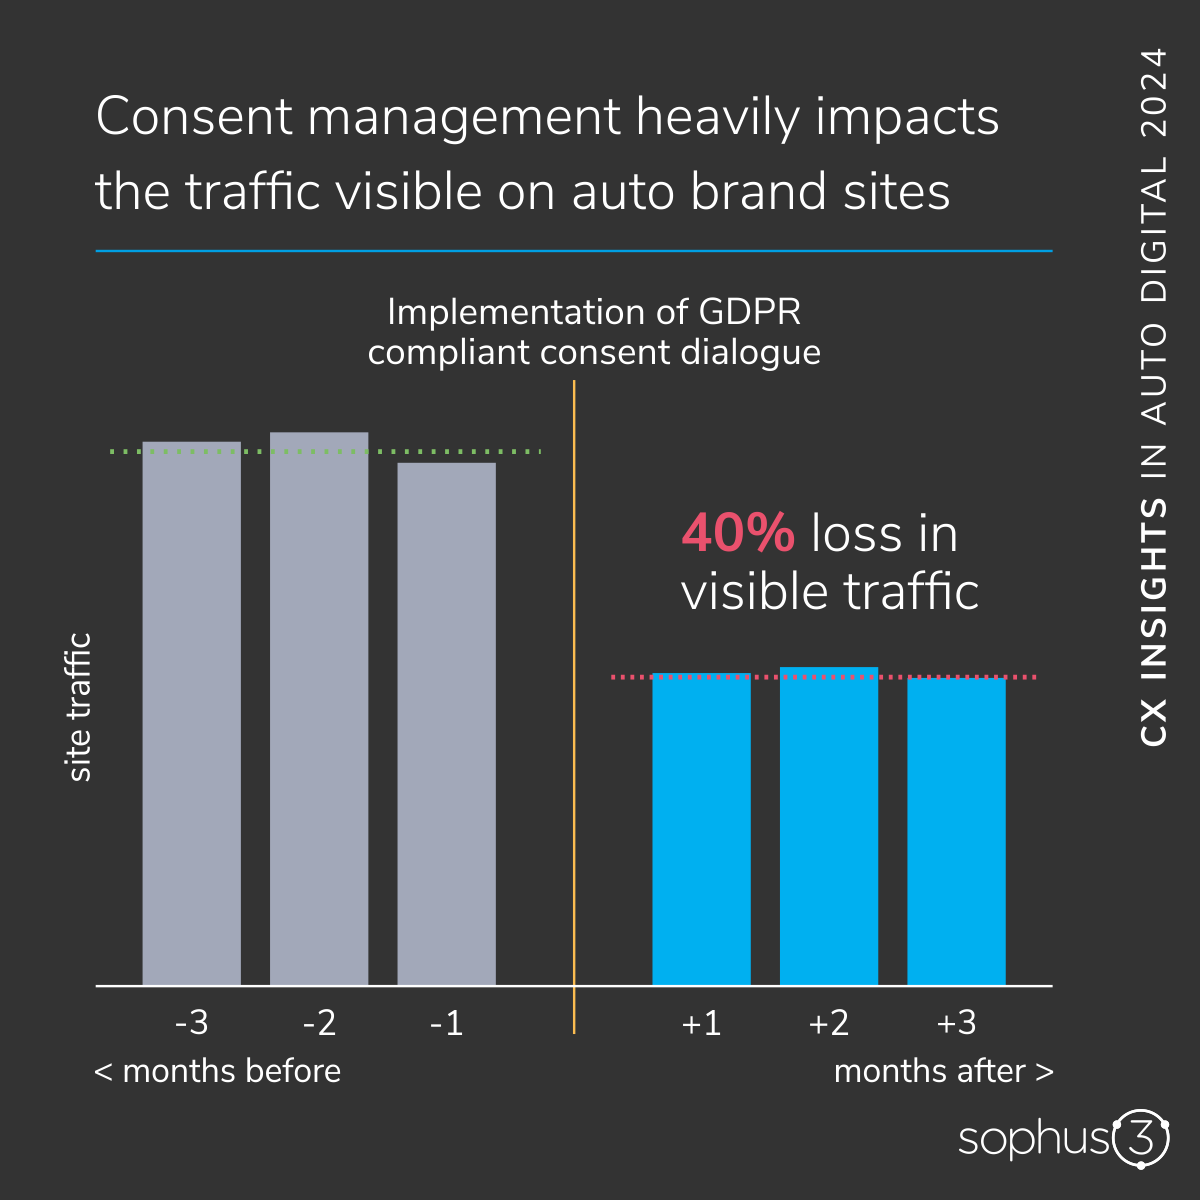 Graph showing aggregated monthly visits to four car brand web sites that shows a 40% fall in traffic after the implementation of GDPR compliant consent dialogues.